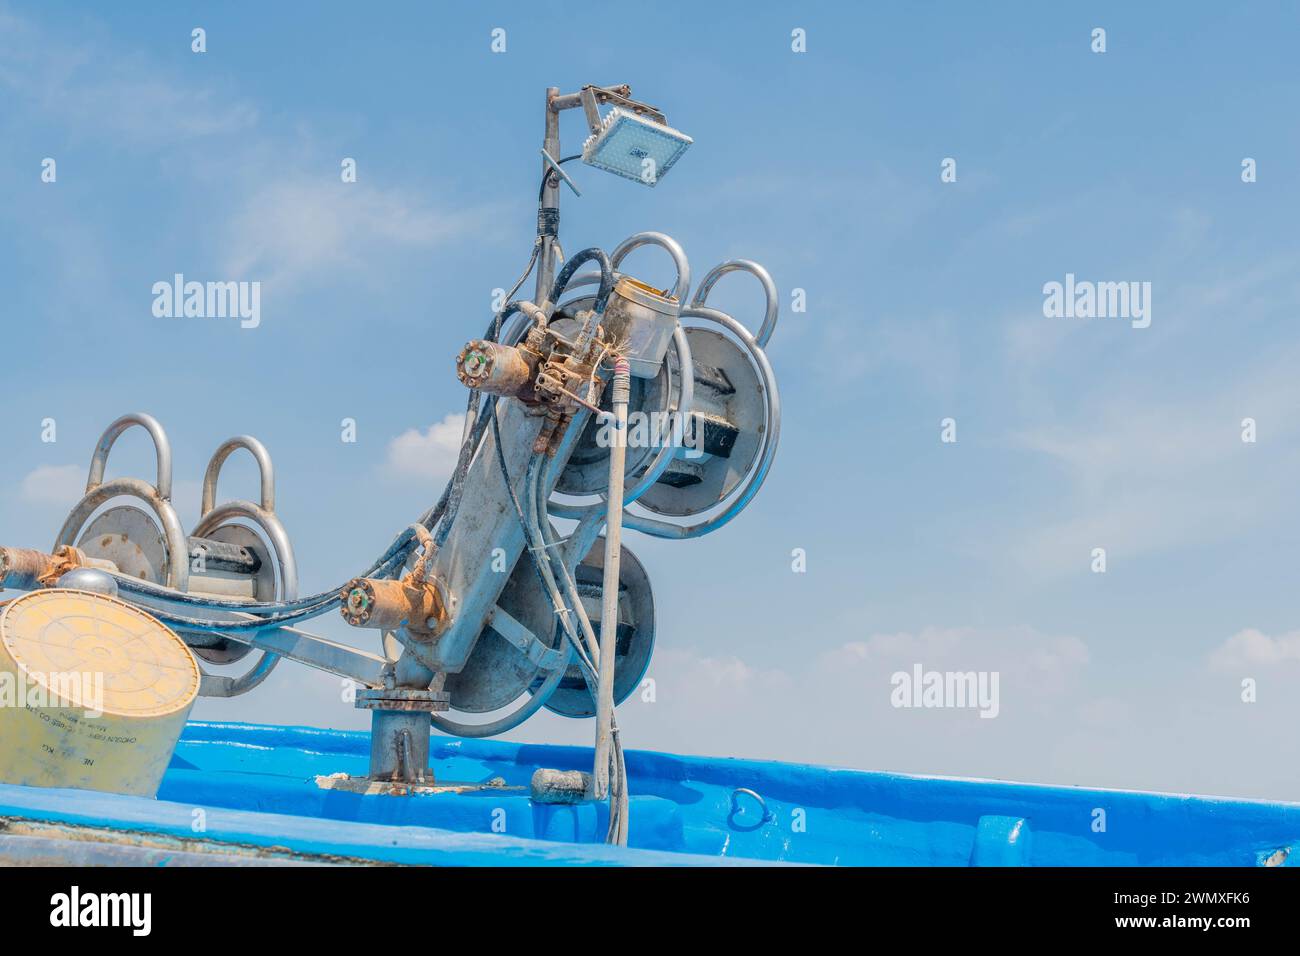 Blue fishing boat equipment with reels and winch under open sky, In South Korea Stock Photo